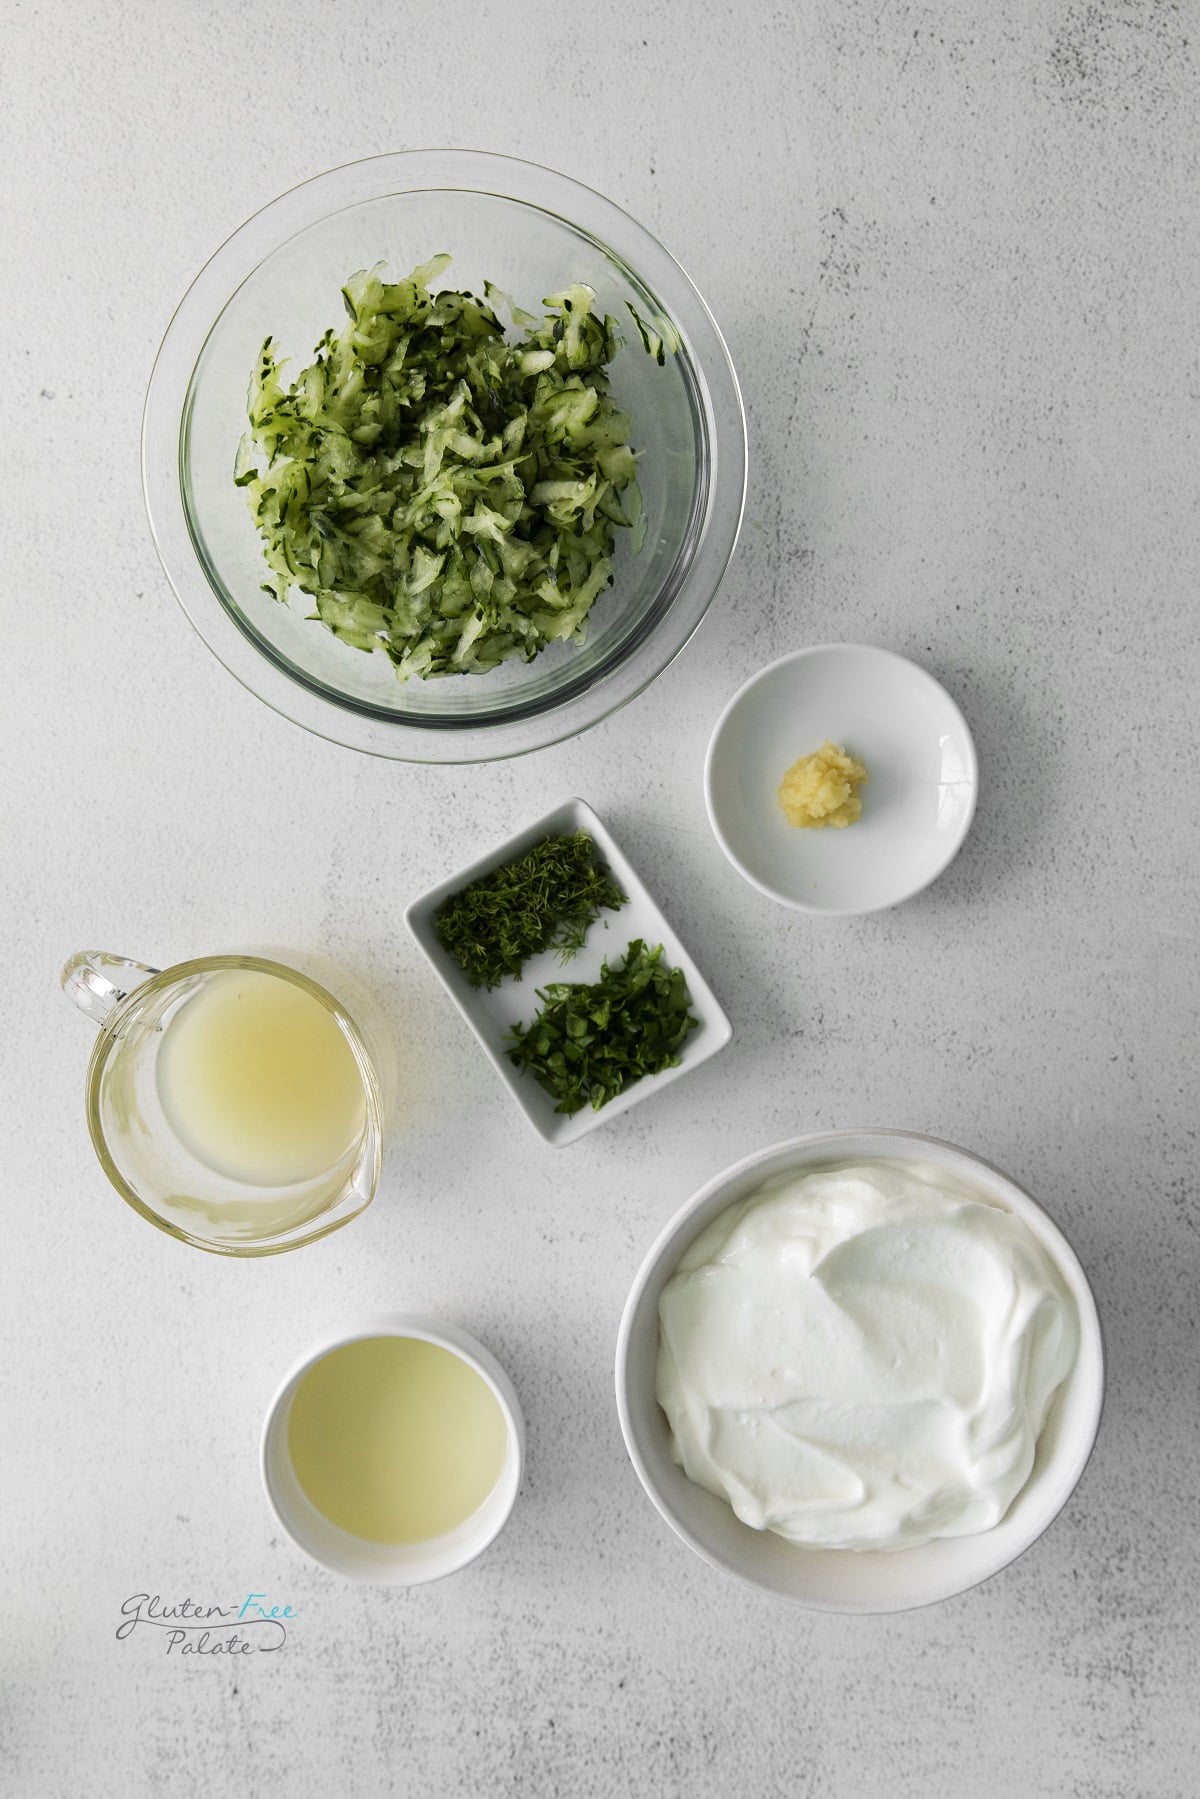 The ingredients for homemade Tzatziki dip, measured into separate small bowls on a concrete counter, viewed from above